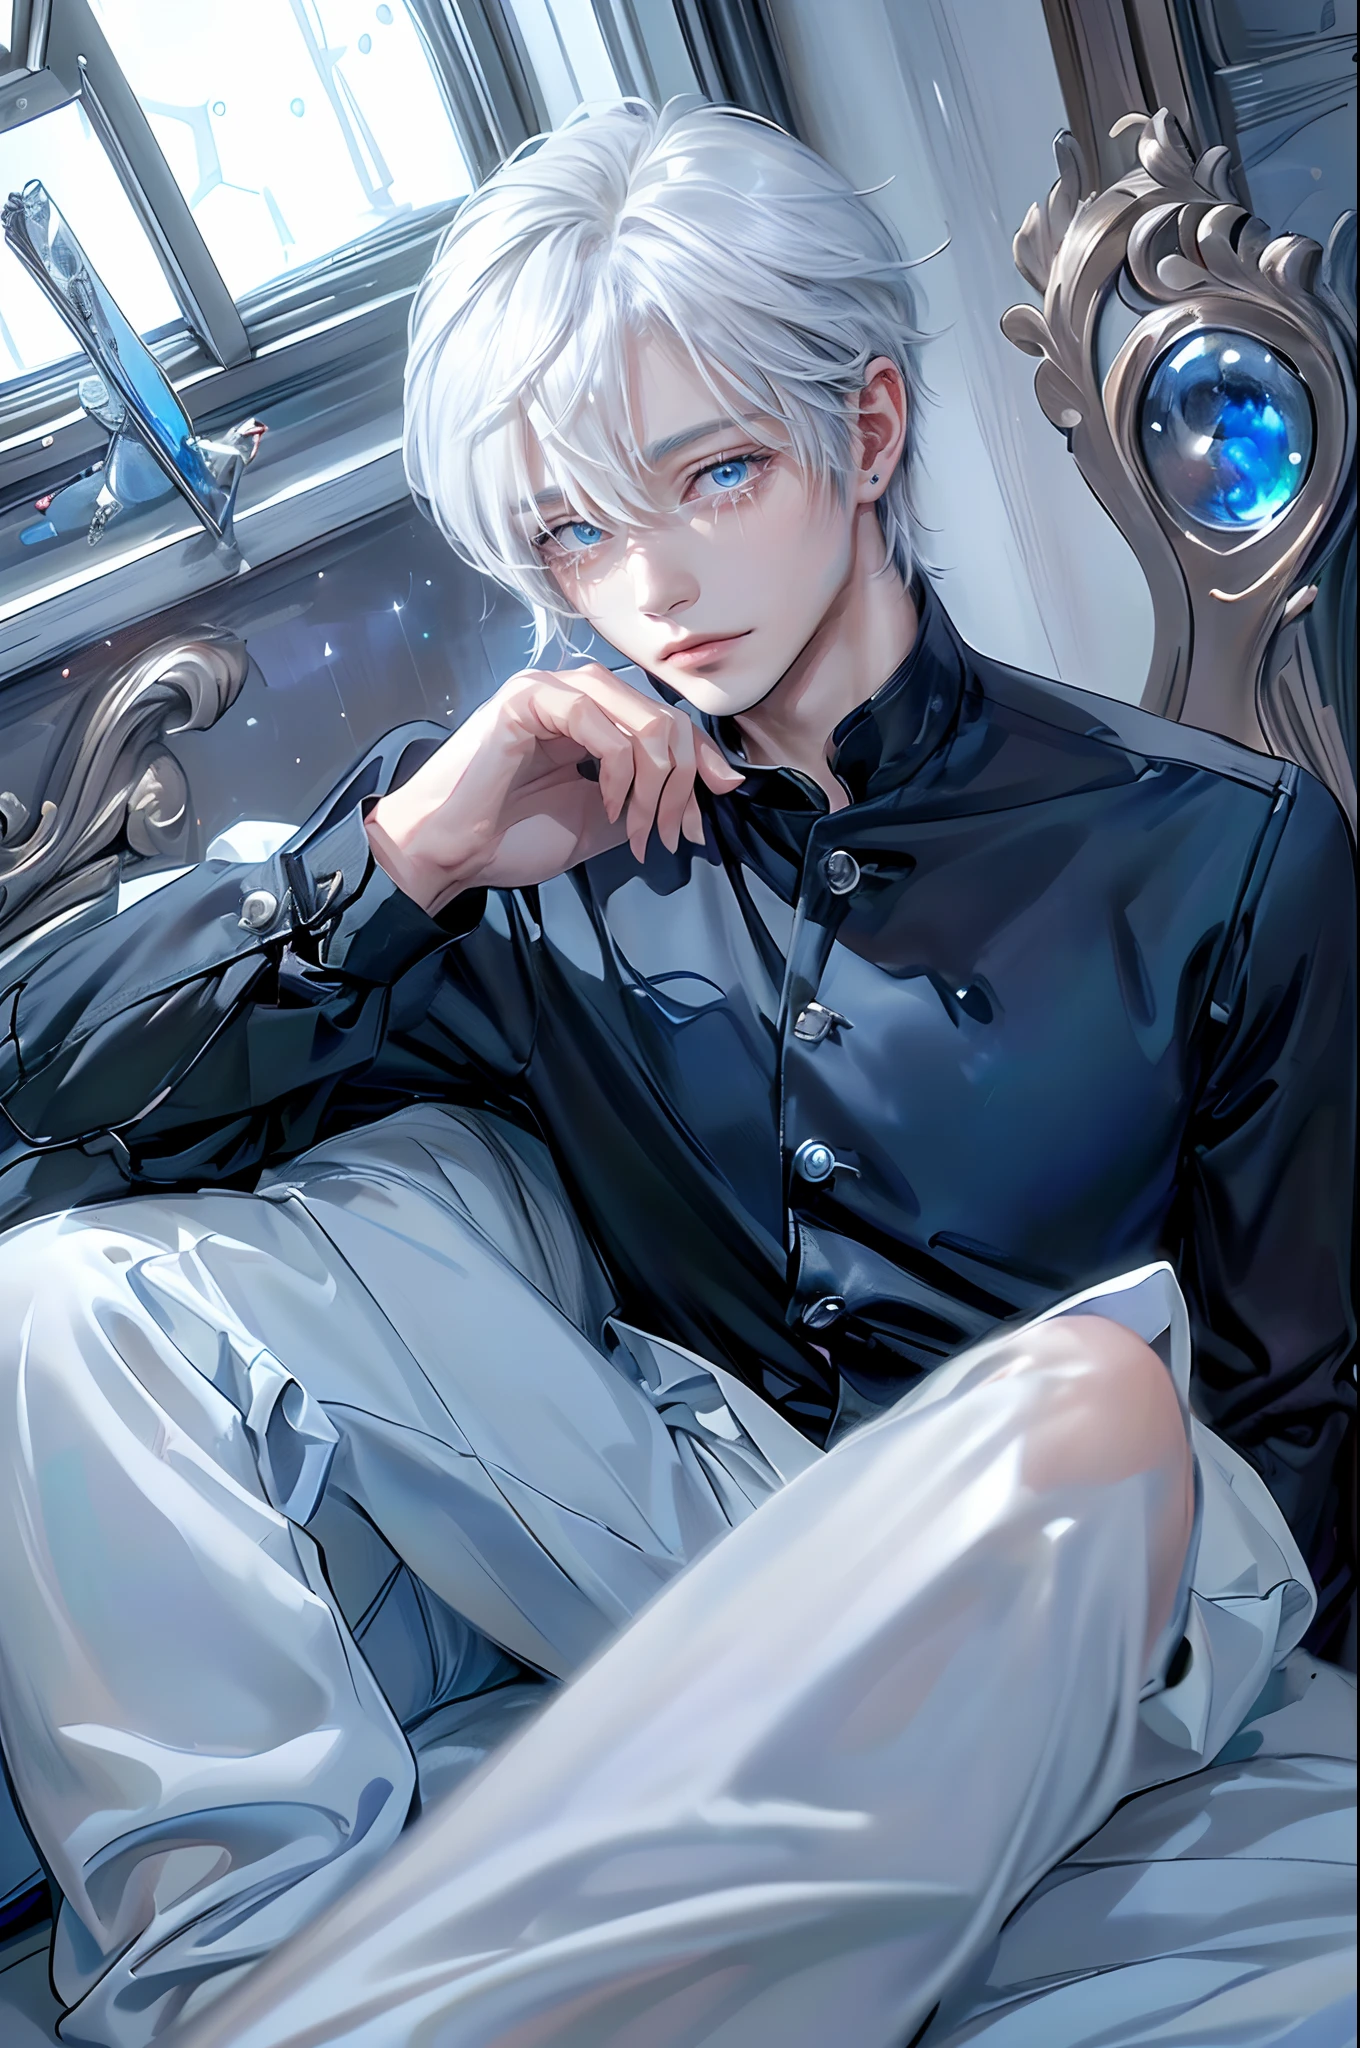 ((4K works))、​masterpiece、(top-quality)、One beautiful boy、Slim body、tall、((Black Y-shirt and white pants、Charming British knight style))、Please wear one jacket、(Detailed beautiful eyes)、Fantastic Night、((You can see the starry sky from the window))、Fantastic room at midnight、((Face similar to Carly Rae Jepsen))、((Short-haired white hair))、((Smaller face))、((Neutral face))、((Bright blue eyes))、((American adult male))、((Adult male 26 years old))、((Cool Men))、((Like a celebrity))、((Gentle look))、((Korean Makeup))、((elongated and sharp eyes))、((Happy dating))、((boyish))、((Upper body photography))、Professional Photos、((Shot alone))、((Shot from his front))、((Gentle expression))、((He is in front of the viewer))、((He comforts me))、((He's in the corner of the room))、((He reaches out here))、((He wipes my tears away))、Solitude、suffocating